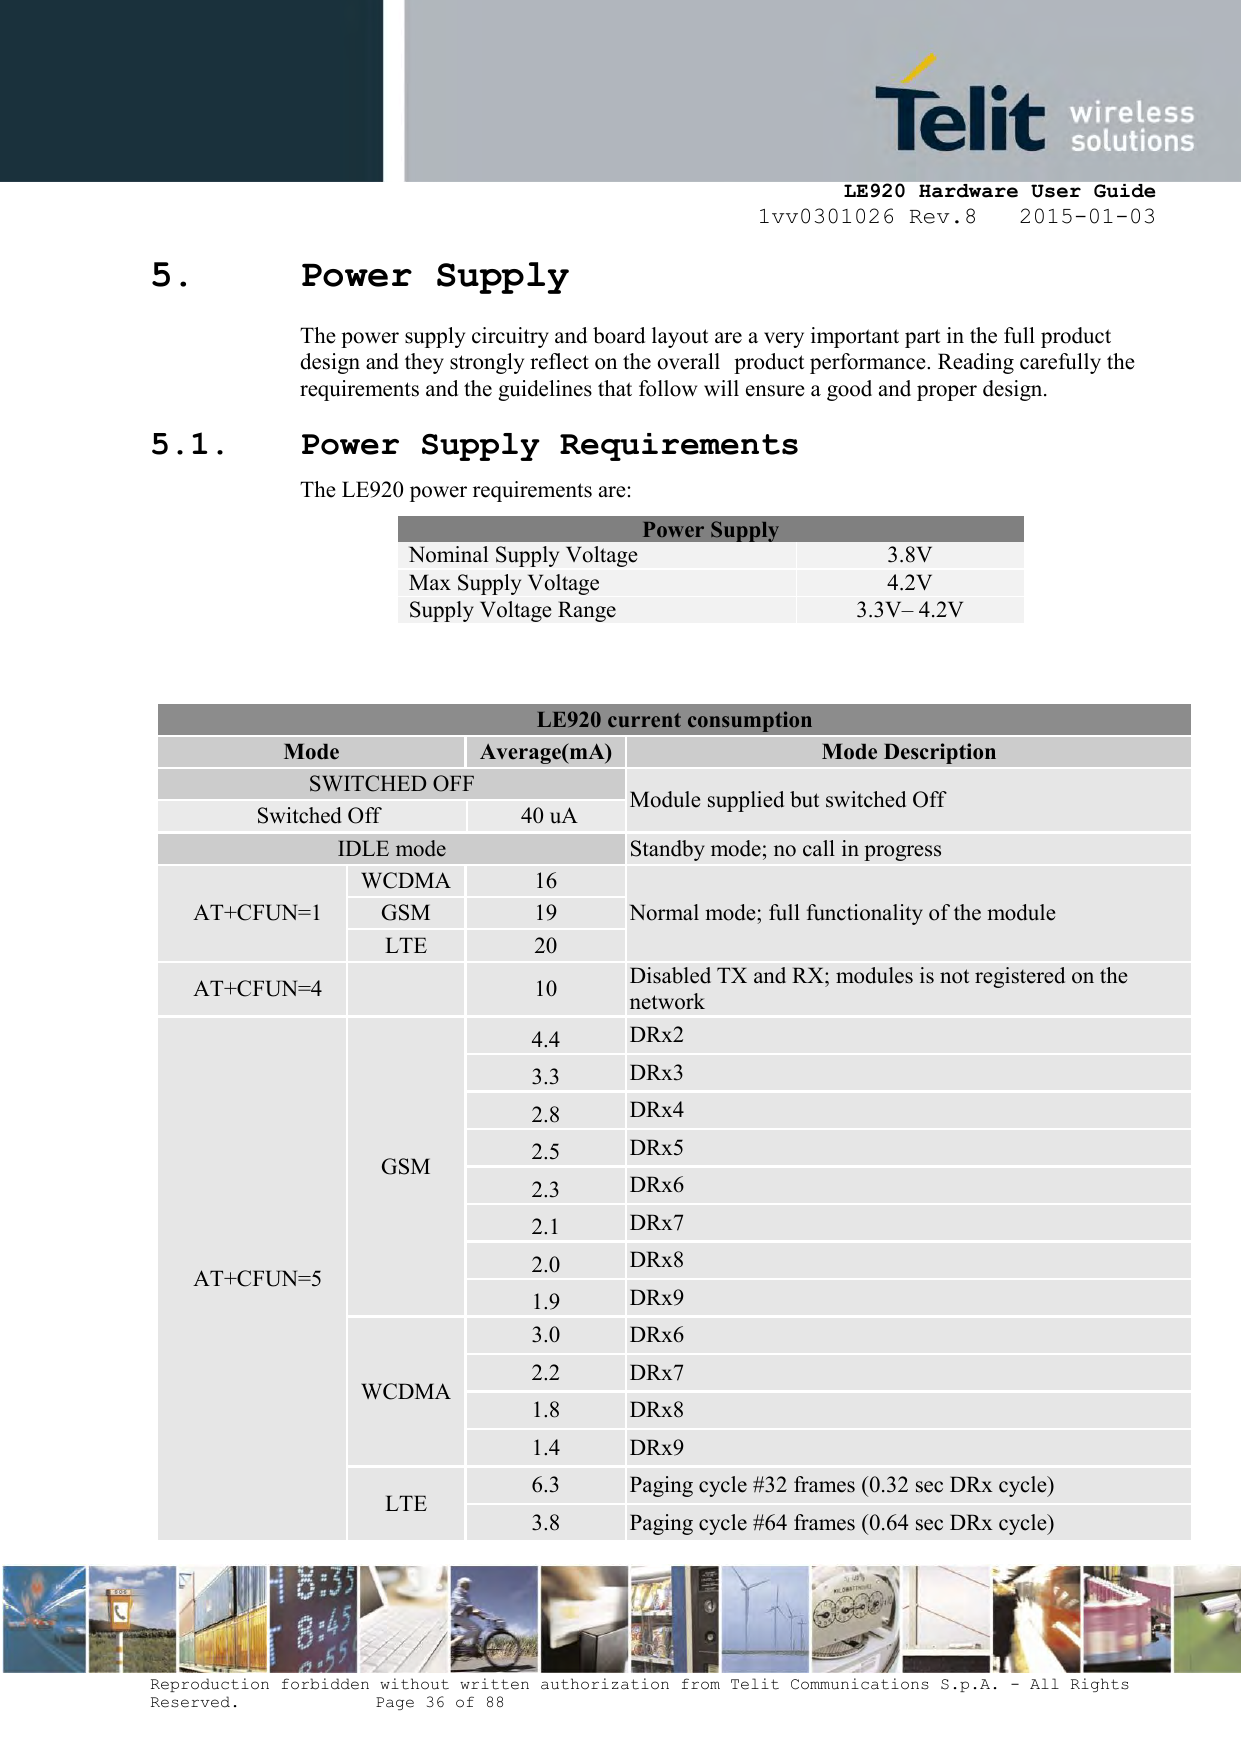     LE920 Hardware User Guide 1vv0301026 Rev.8   2015-01-03 Reproduction forbidden without written authorization from Telit Communications S.p.A. - All Rights Reserved.    Page 36 of 88  5. Power Supply  The power supply circuitry and board layout are a very important part in the full product design and they strongly reflect on the overall product performance. Reading carefully the requirements and the guidelines that follow will ensure a good and proper design. 5.1. Power Supply Requirements The LE920 power requirements are: Power Supply Nominal Supply Voltage 3.8V Max Supply Voltage 4.2V Supply Voltage Range 3.3V– 4.2V    LE920 current consumption Mode Average(mA) Mode Description SWITCHED OFF Module supplied but switched Off Switched Off  40 uA IDLE mode Standby mode; no call in progress AT+CFUN=1 WCDMA 16 Normal mode; full functionality of the module GSM 19 LTE 20 AT+CFUN=4  10 Disabled TX and RX; modules is not registered on the network AT+CFUN=5 GSM 4.4 DRx2 3.3 DRx3 2.8 DRx4 2.5 DRx5 2.3 DRx6 2.1 DRx7 2.0 DRx8 1.9 DRx9 WCDMA 3.0 DRx6 2.2 DRx7 1.8 DRx8 1.4 DRx9 LTE 6.3 Paging cycle #32 frames (0.32 sec DRx cycle) 3.8 Paging cycle #64 frames (0.64 sec DRx cycle) 